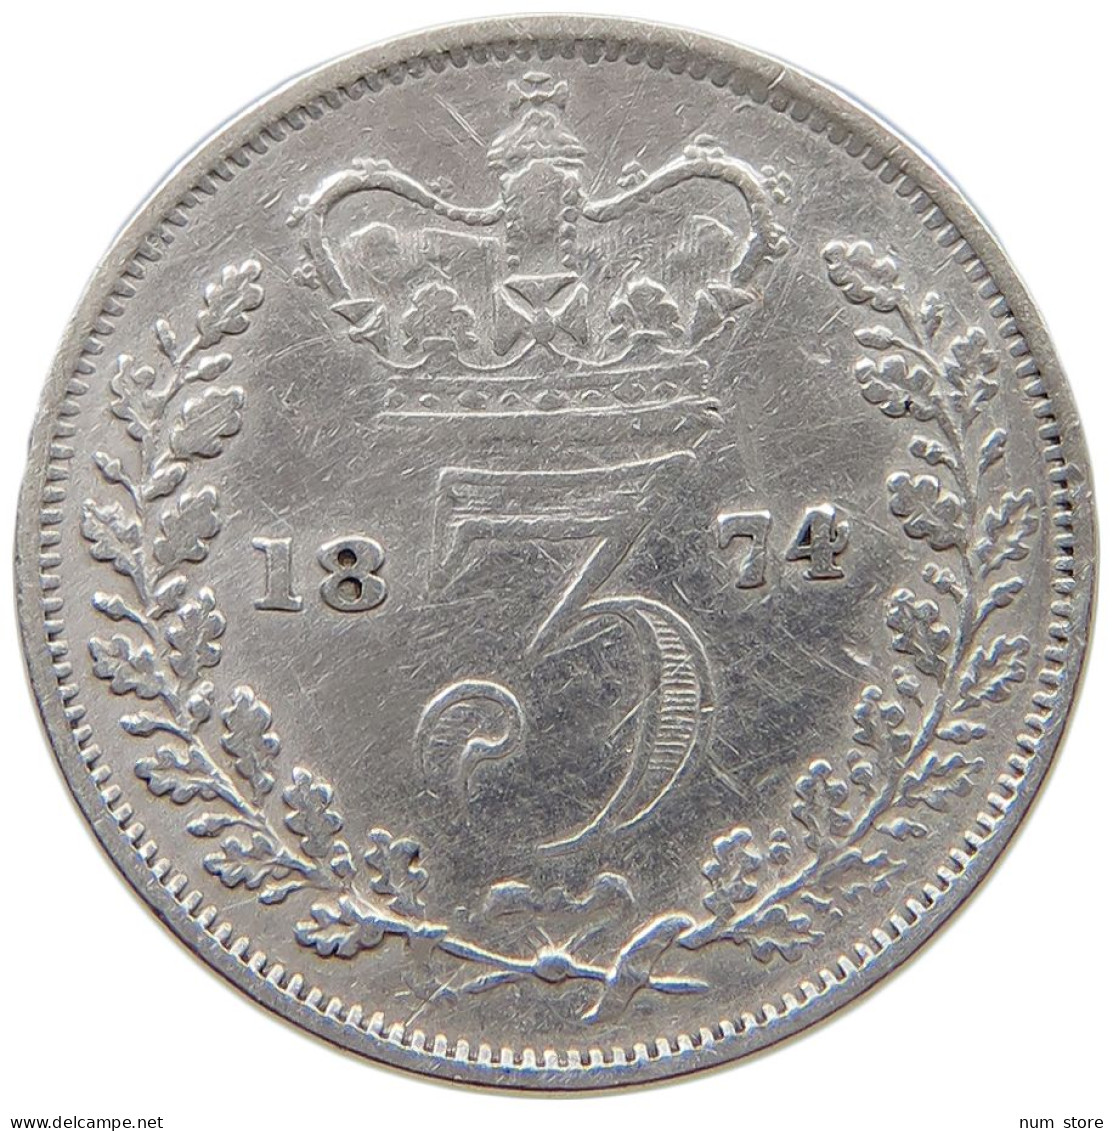 GREAT BRITAIN THREEPENCE 1874 Victoria 1837-1901 #t148 0859 - F. 3 Pence